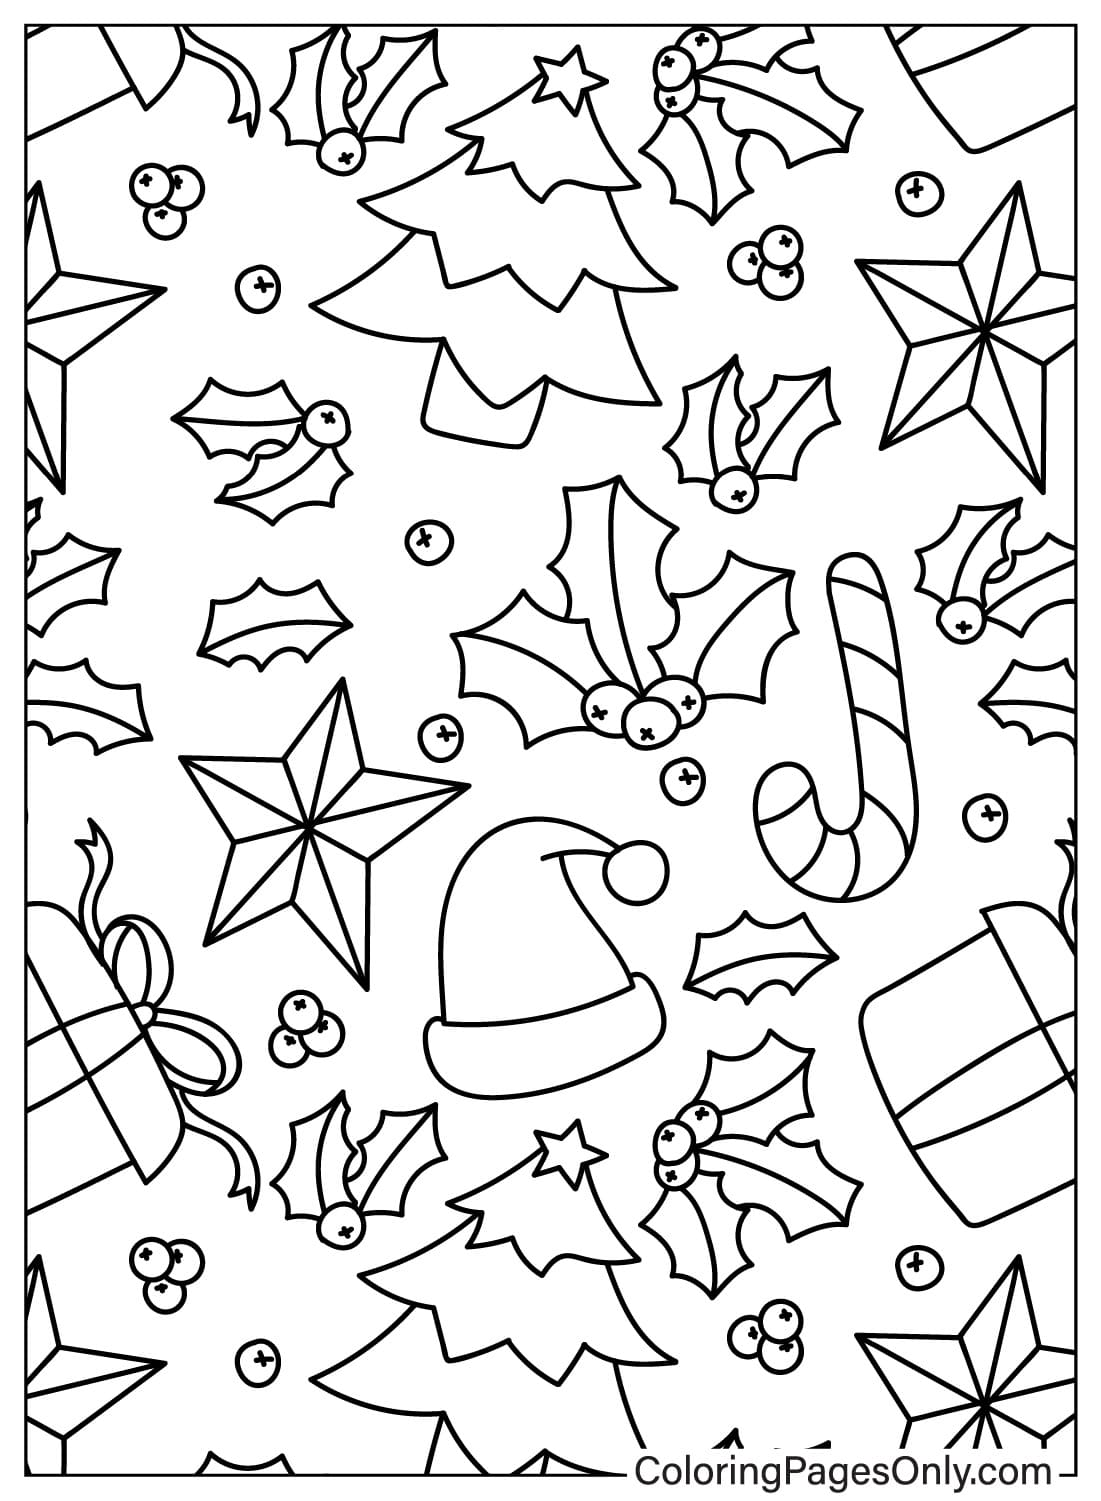 Christmas Pattern Free Coloring Page - Free Printable Coloring Pages